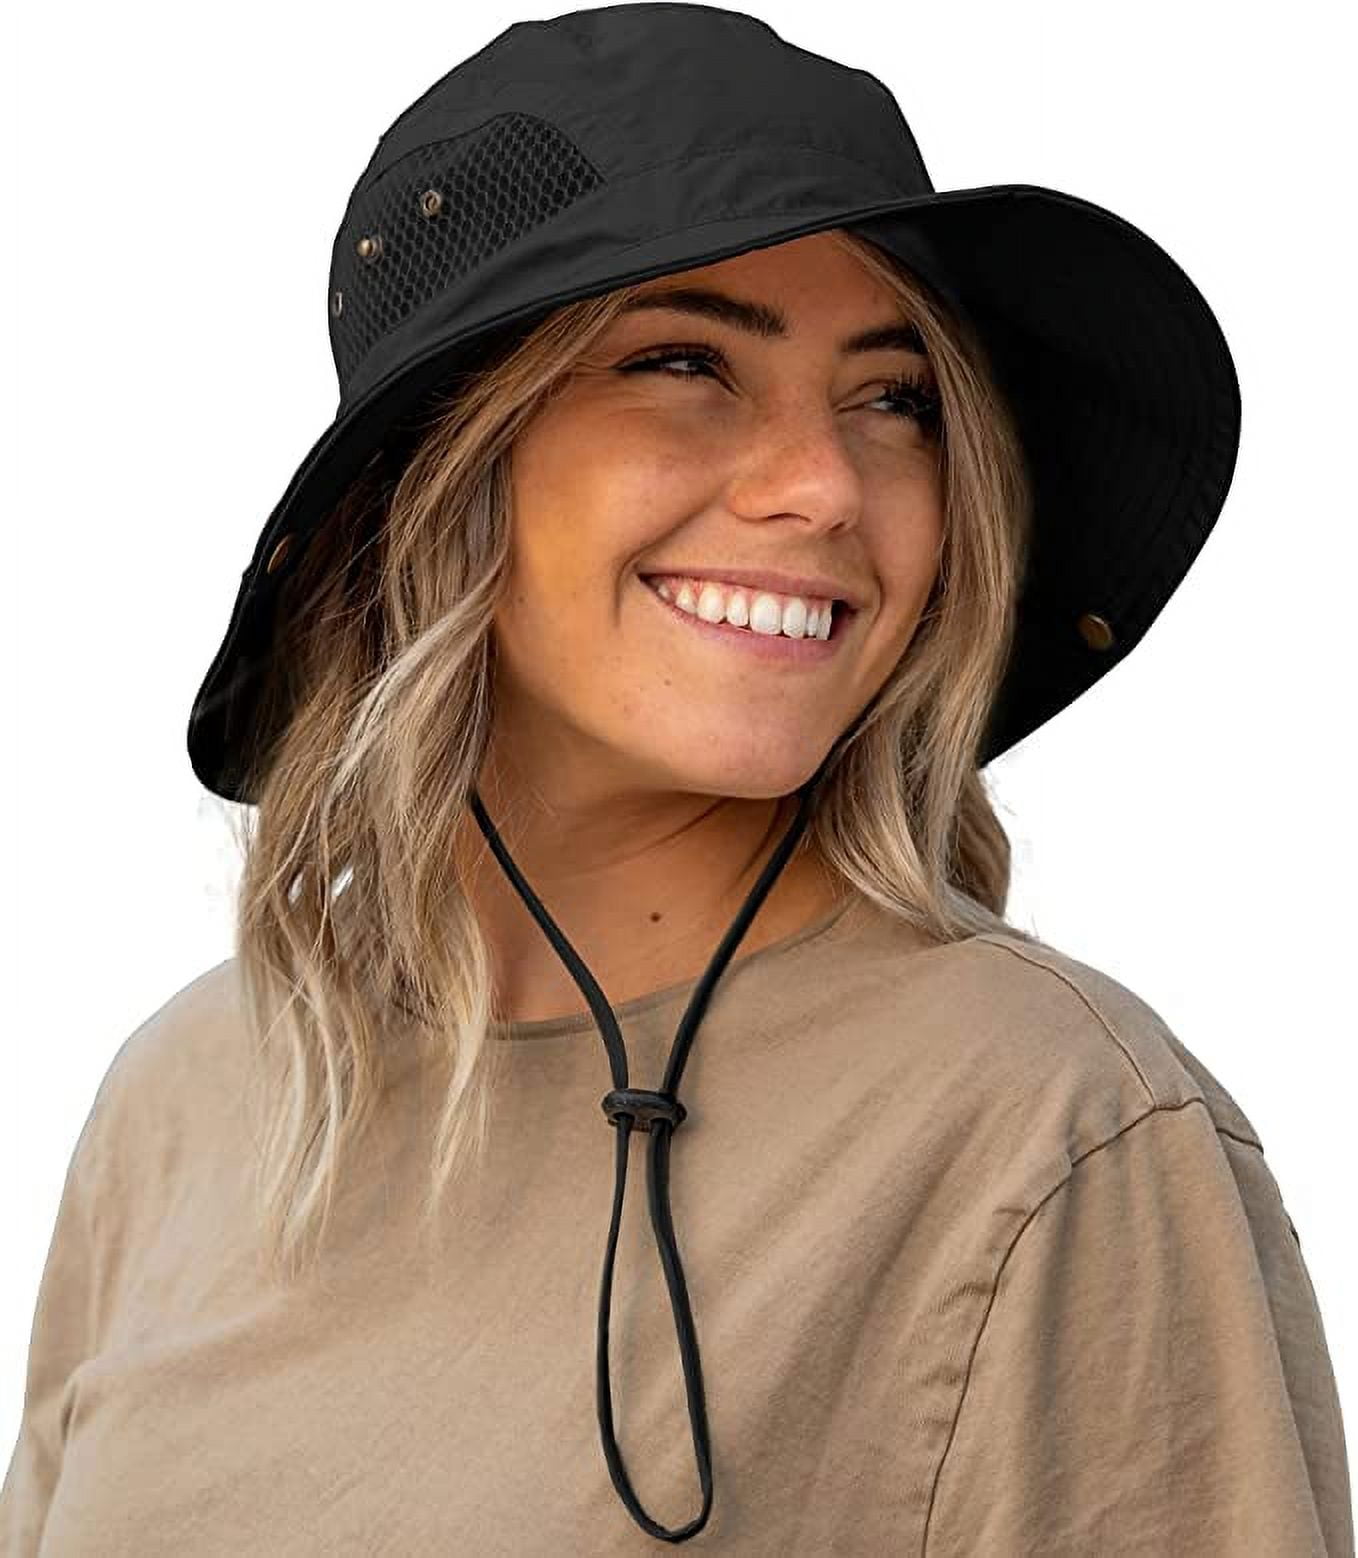 GearTOP Fishing Hats for Men and Women Sun Protection, Camping Hat Bucket  Hat with Strings Black 